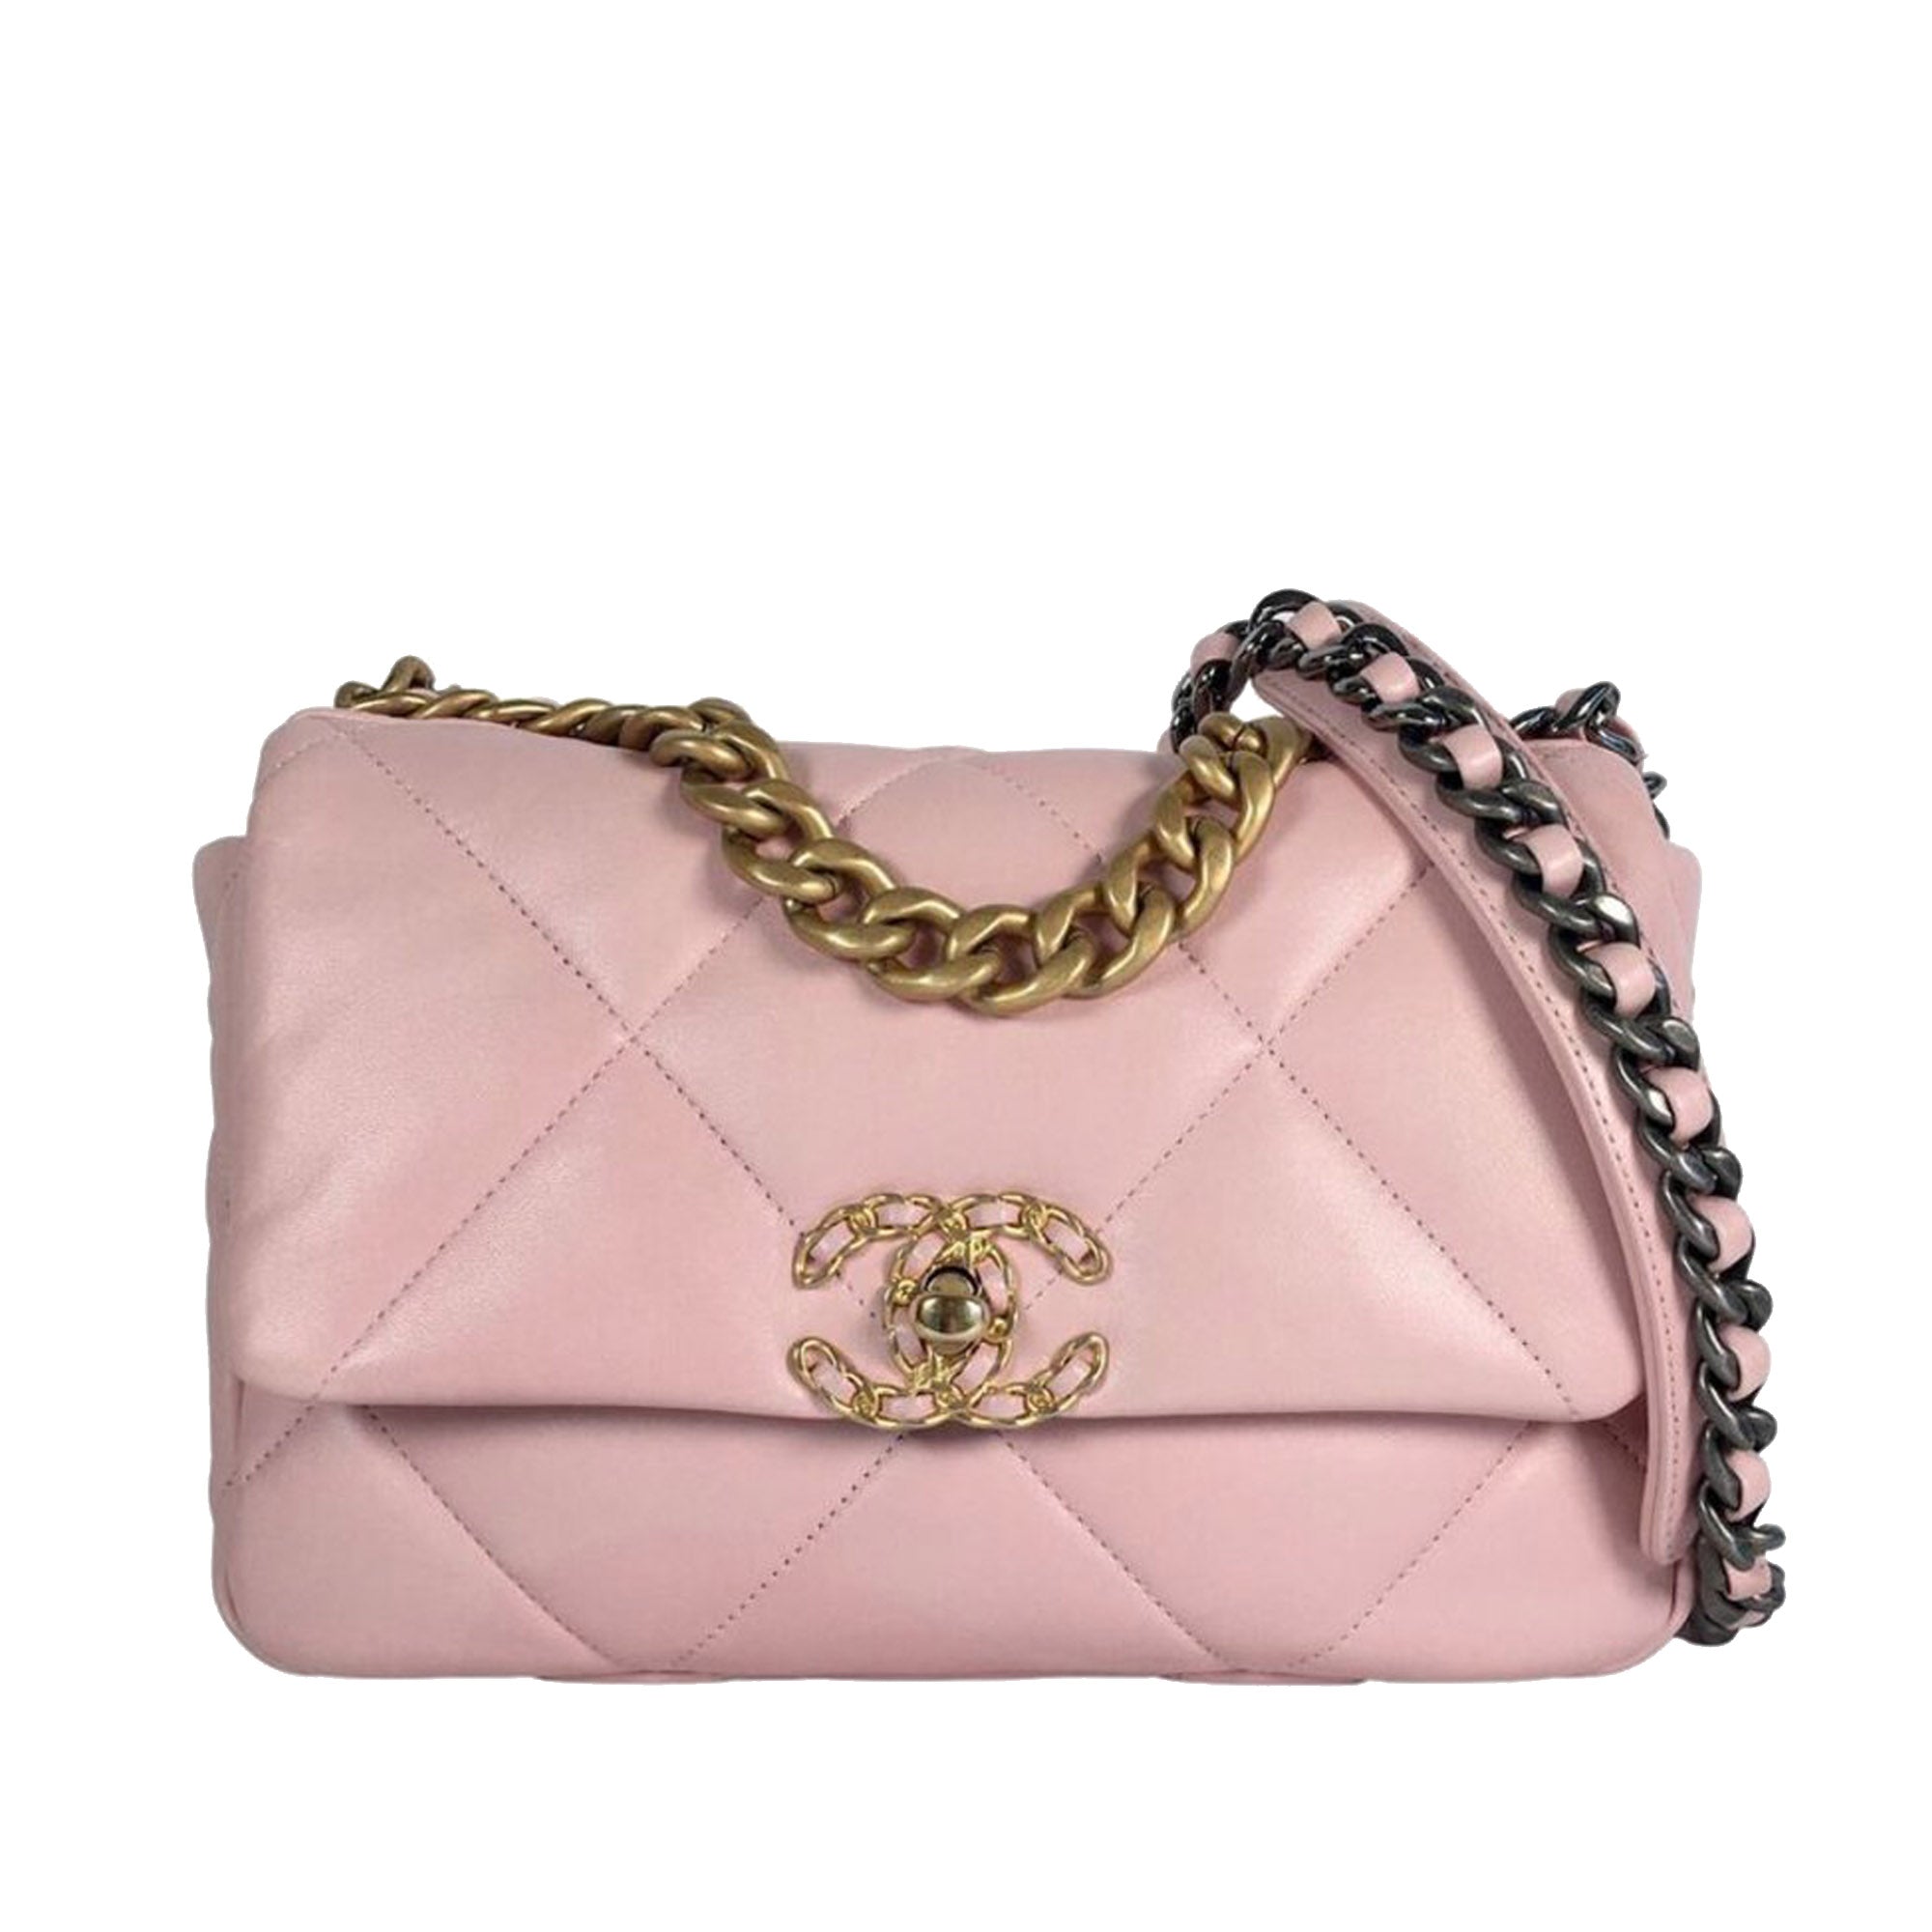 Chanel 19 Iridescent Light Purple Quilted Calfskin Wallet on Chain